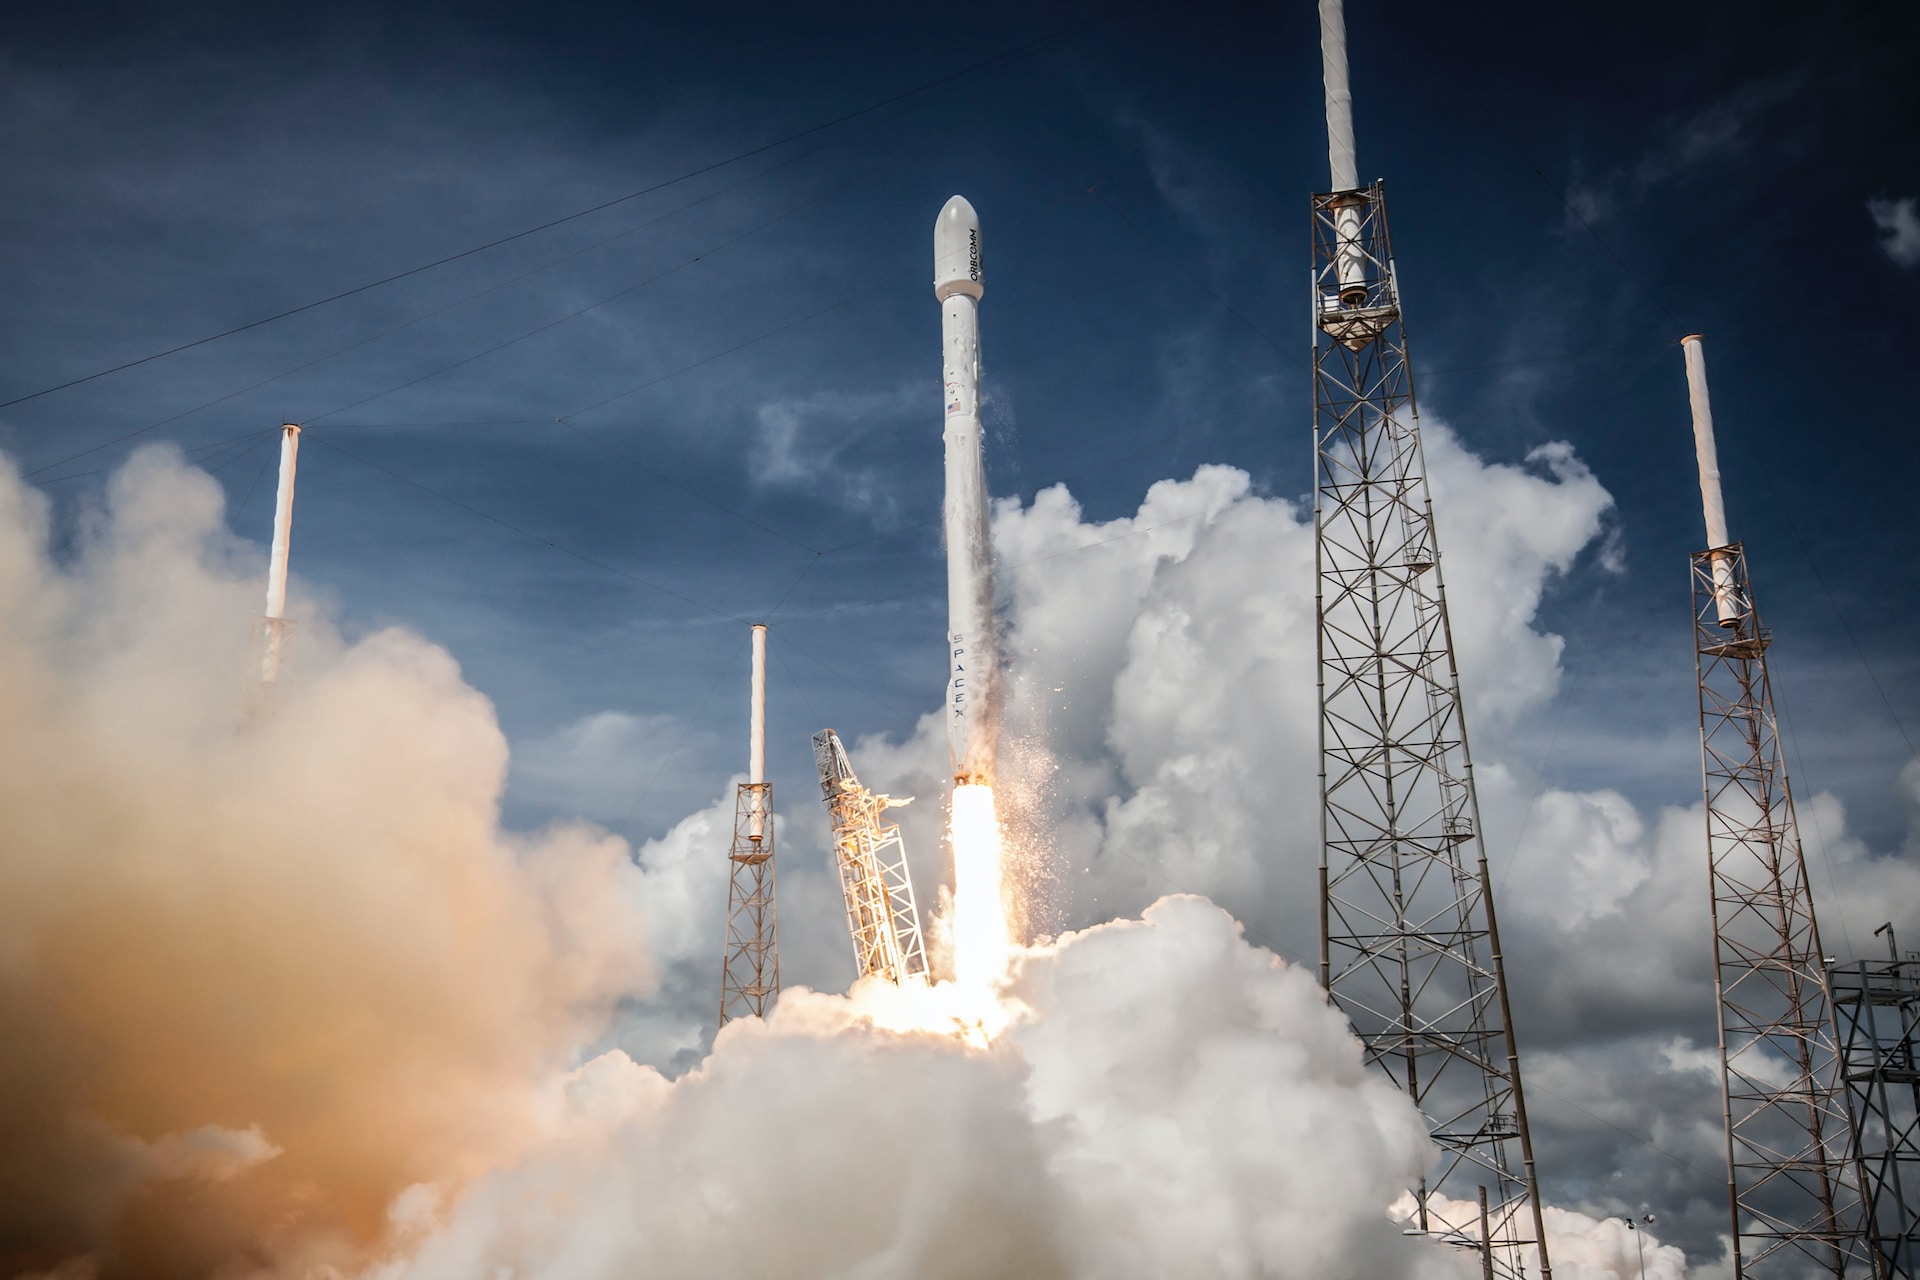 End of investigation: SpaceX receives authorization to resume Falcon 9 flights